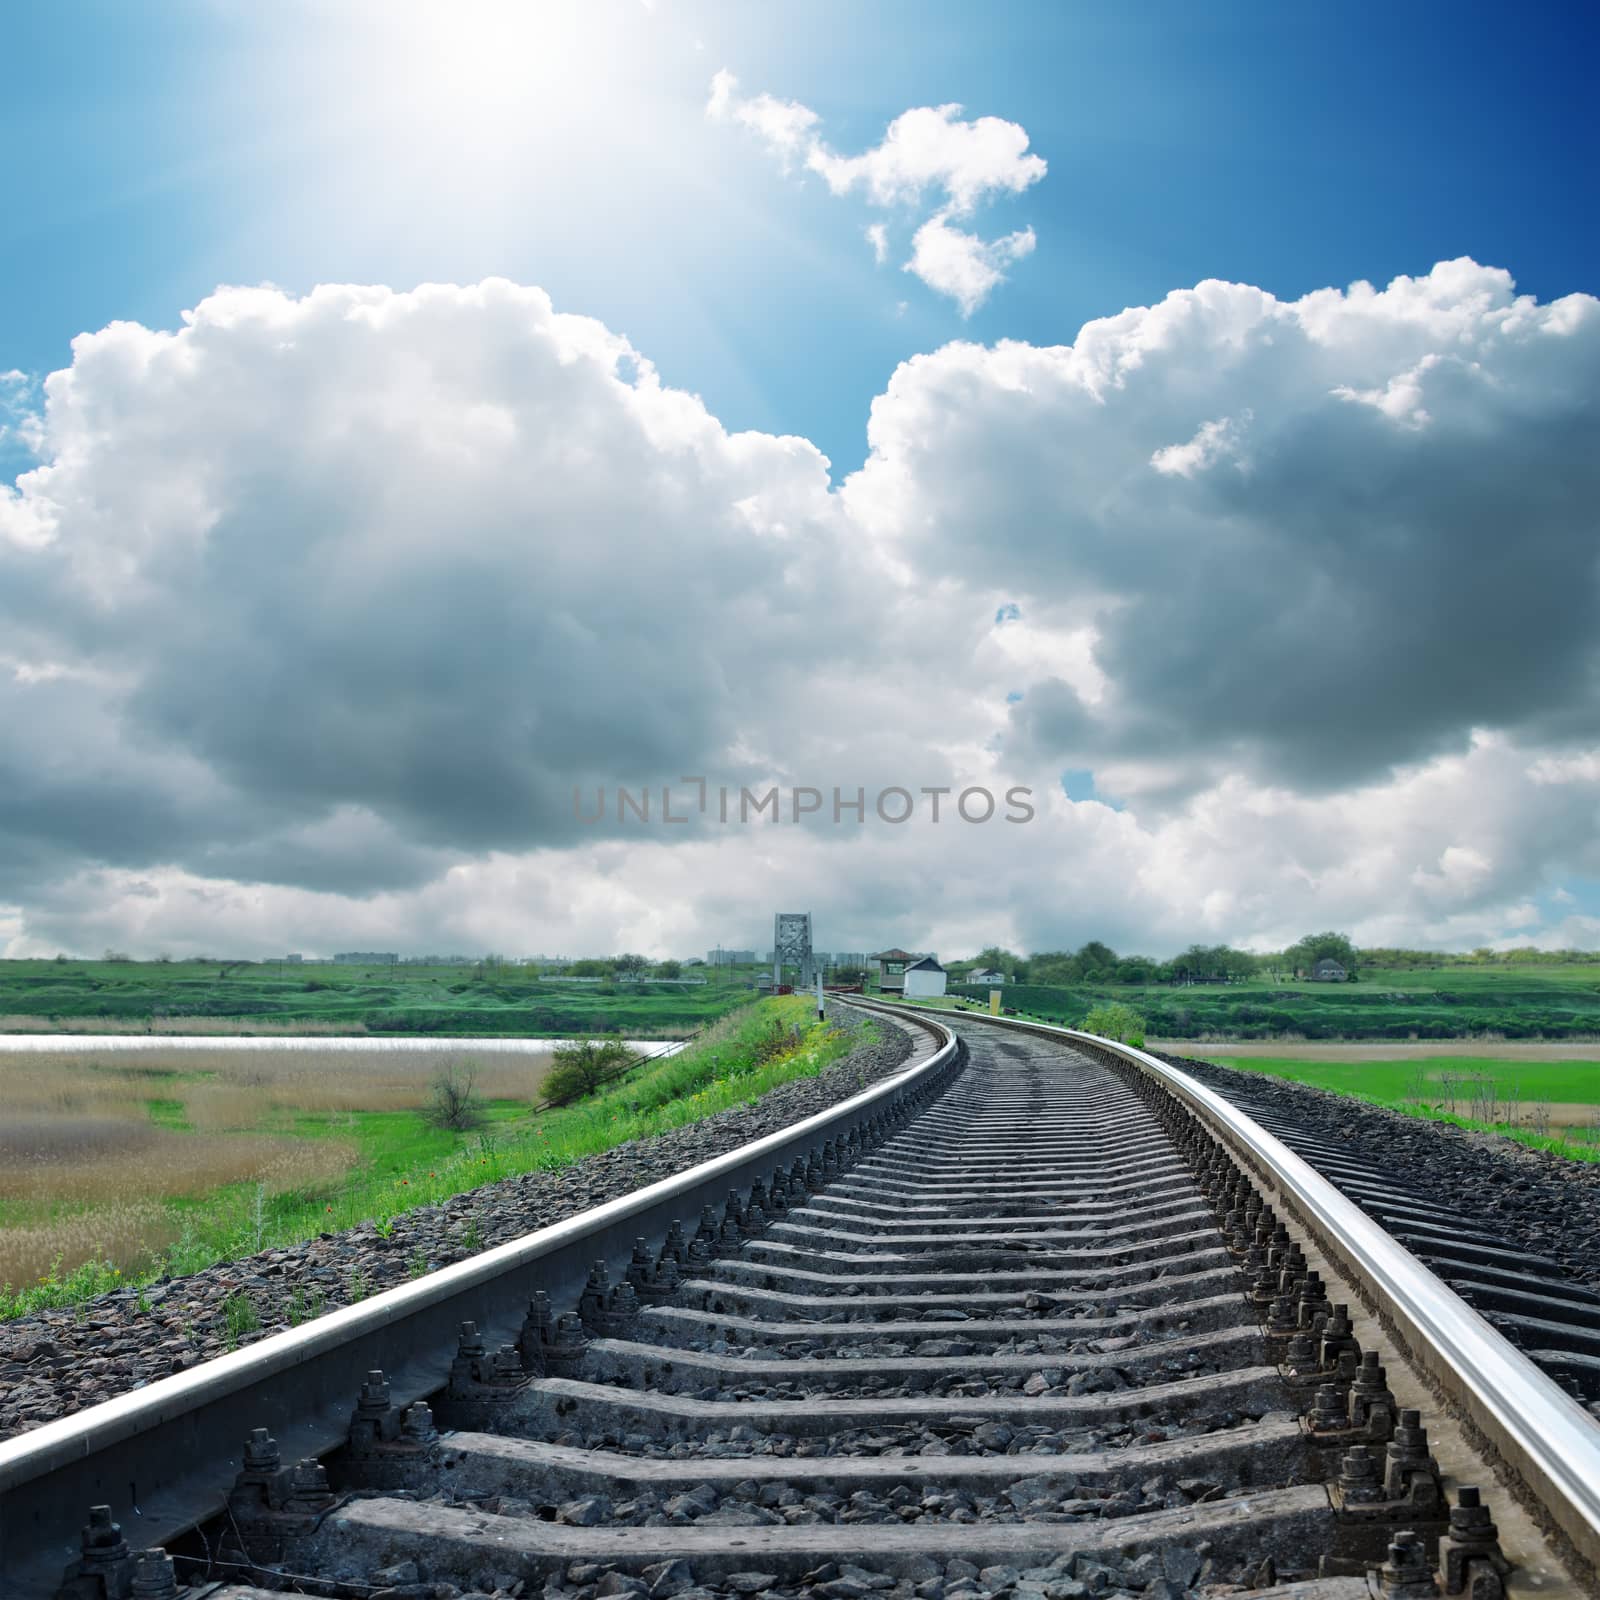 sun over clouds and railroad by mycola